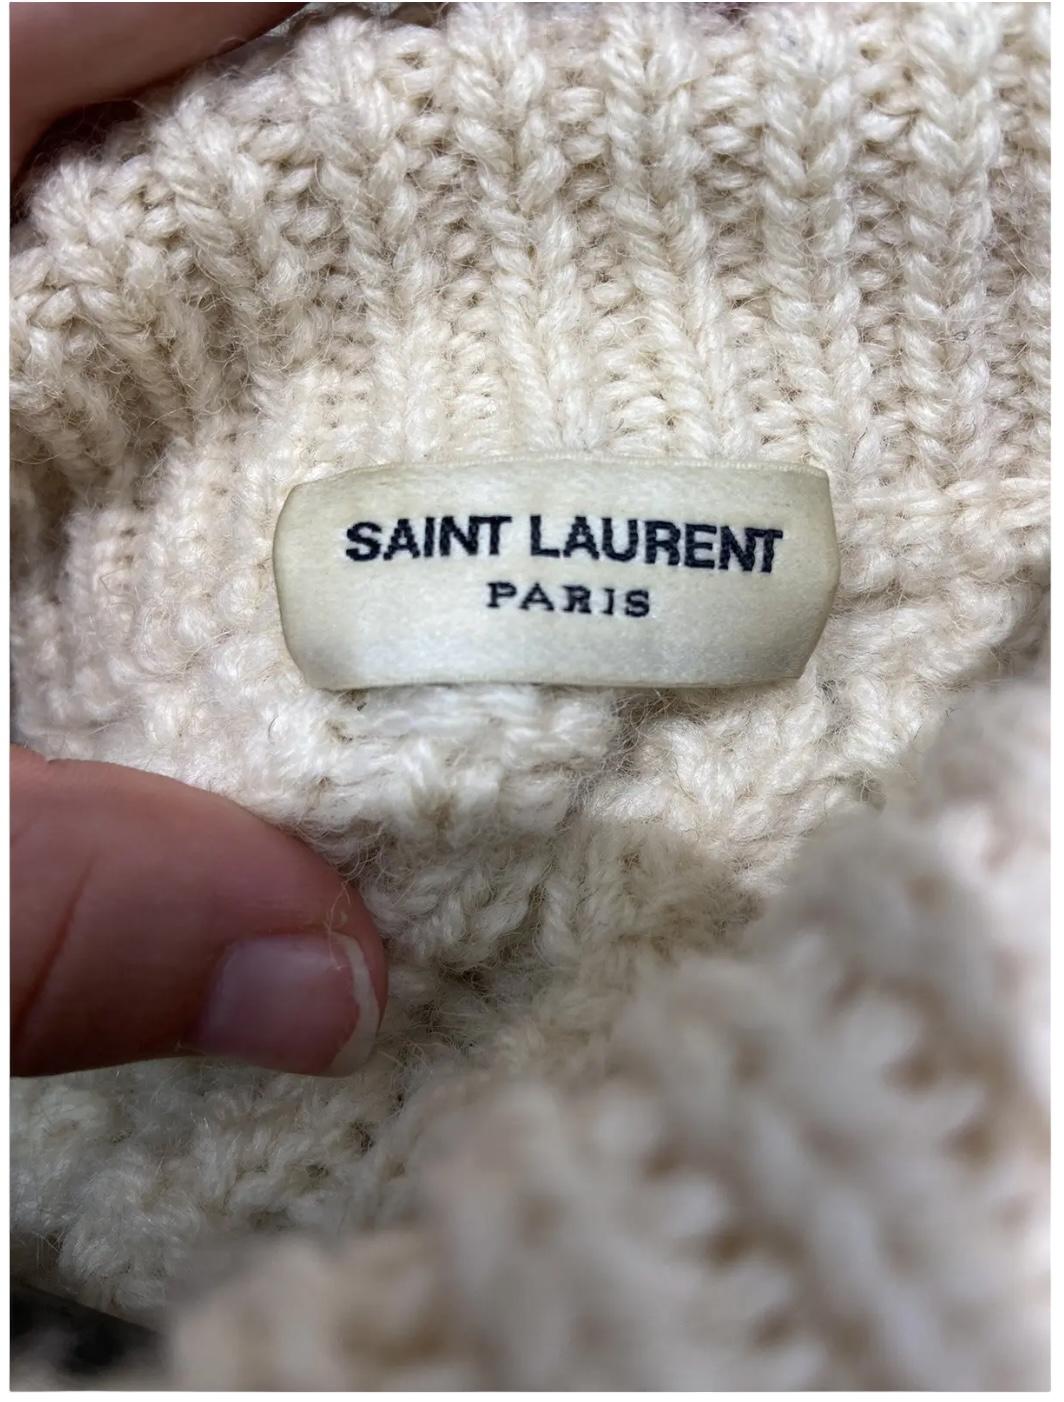 Saint Laurent Paris 2016 Cable Knit Wool Sweater In Excellent Condition For Sale In LISSE, NL